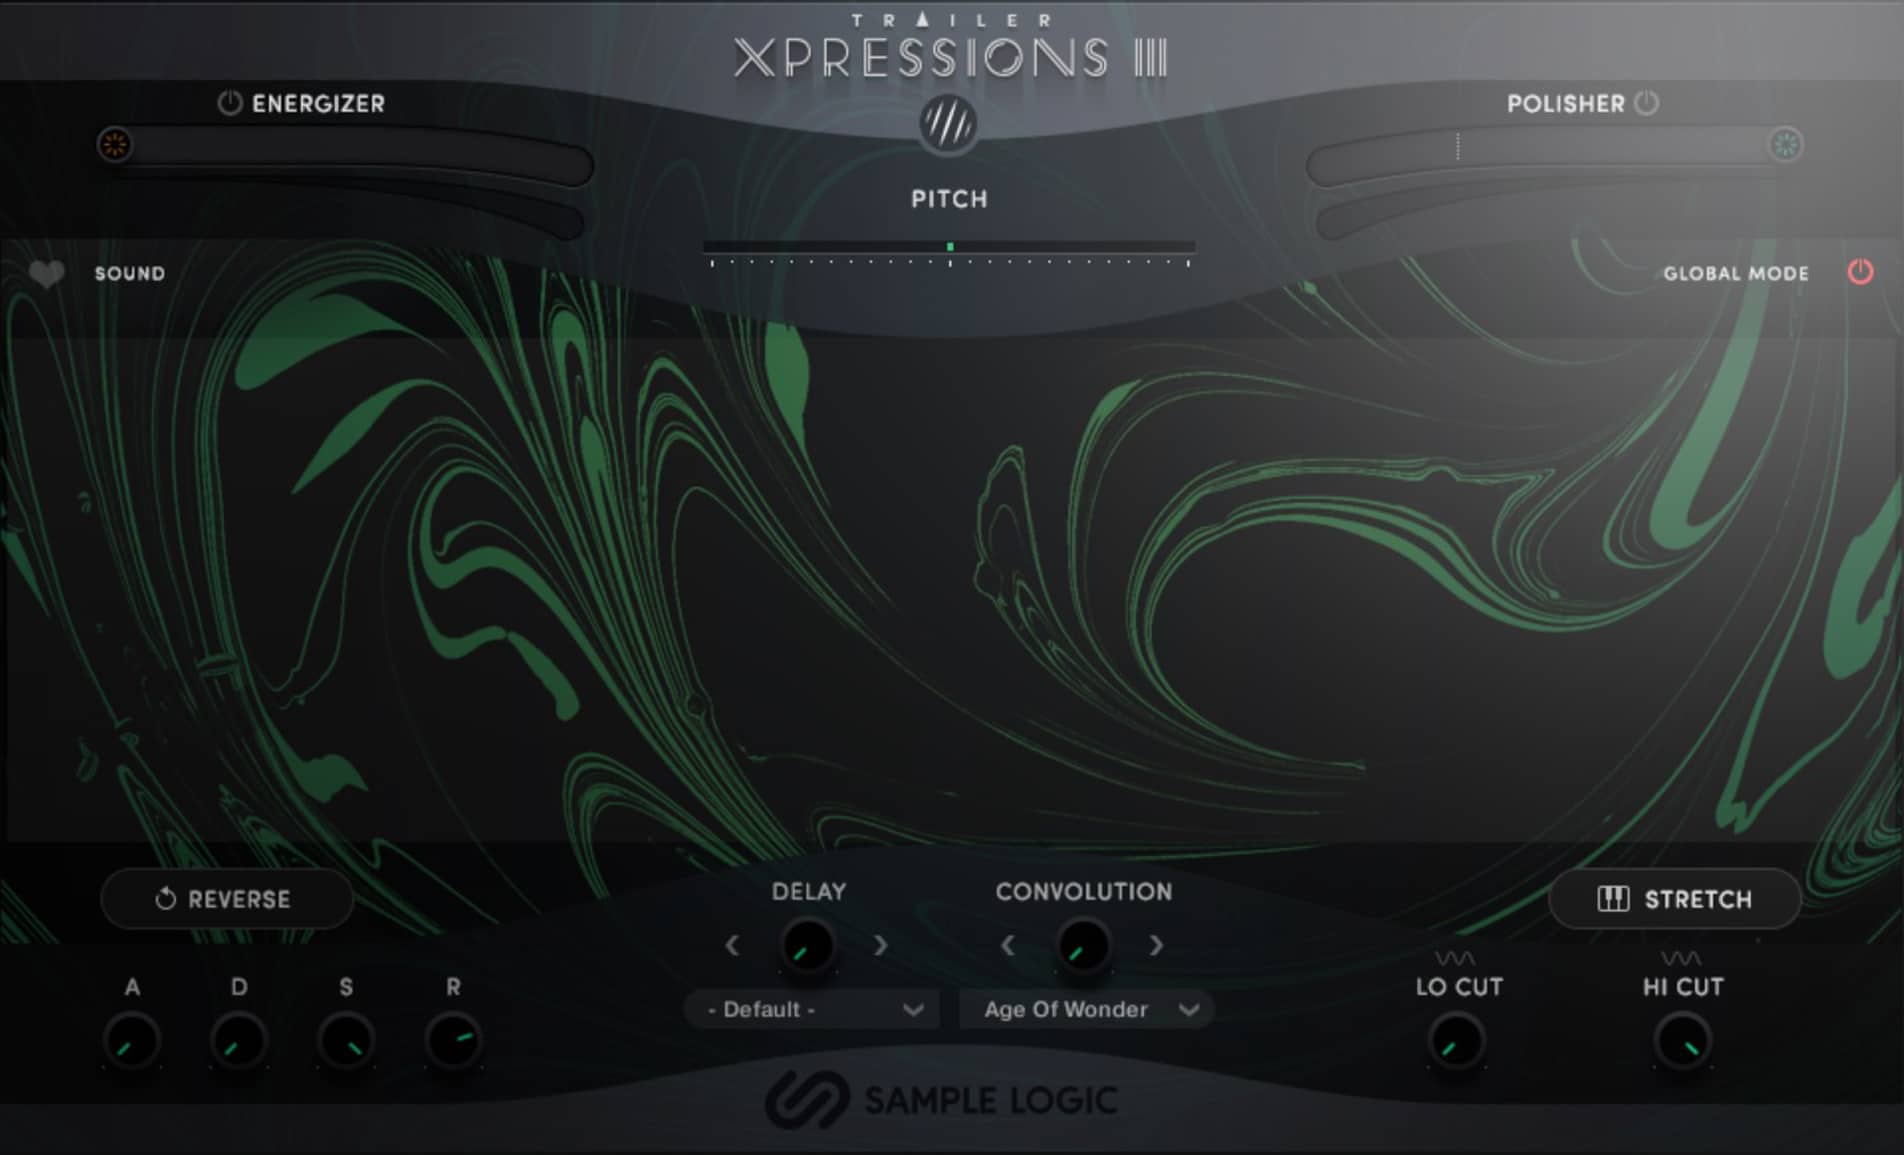 Introducing Trailer Xpressions 3 Cinematic Sound Design Redefined